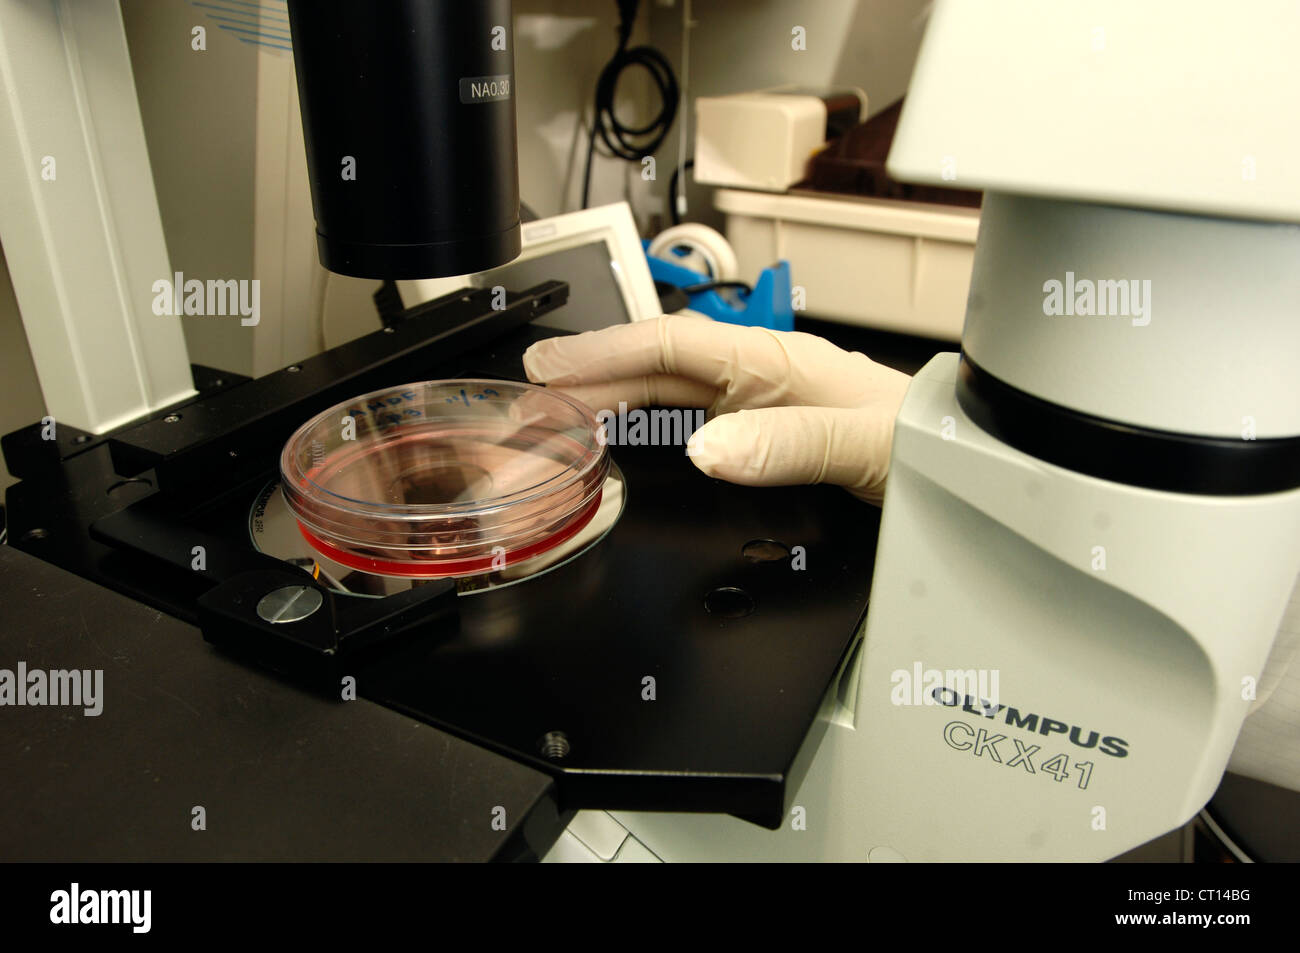 Adult Stem Cells in tray Stock Photo